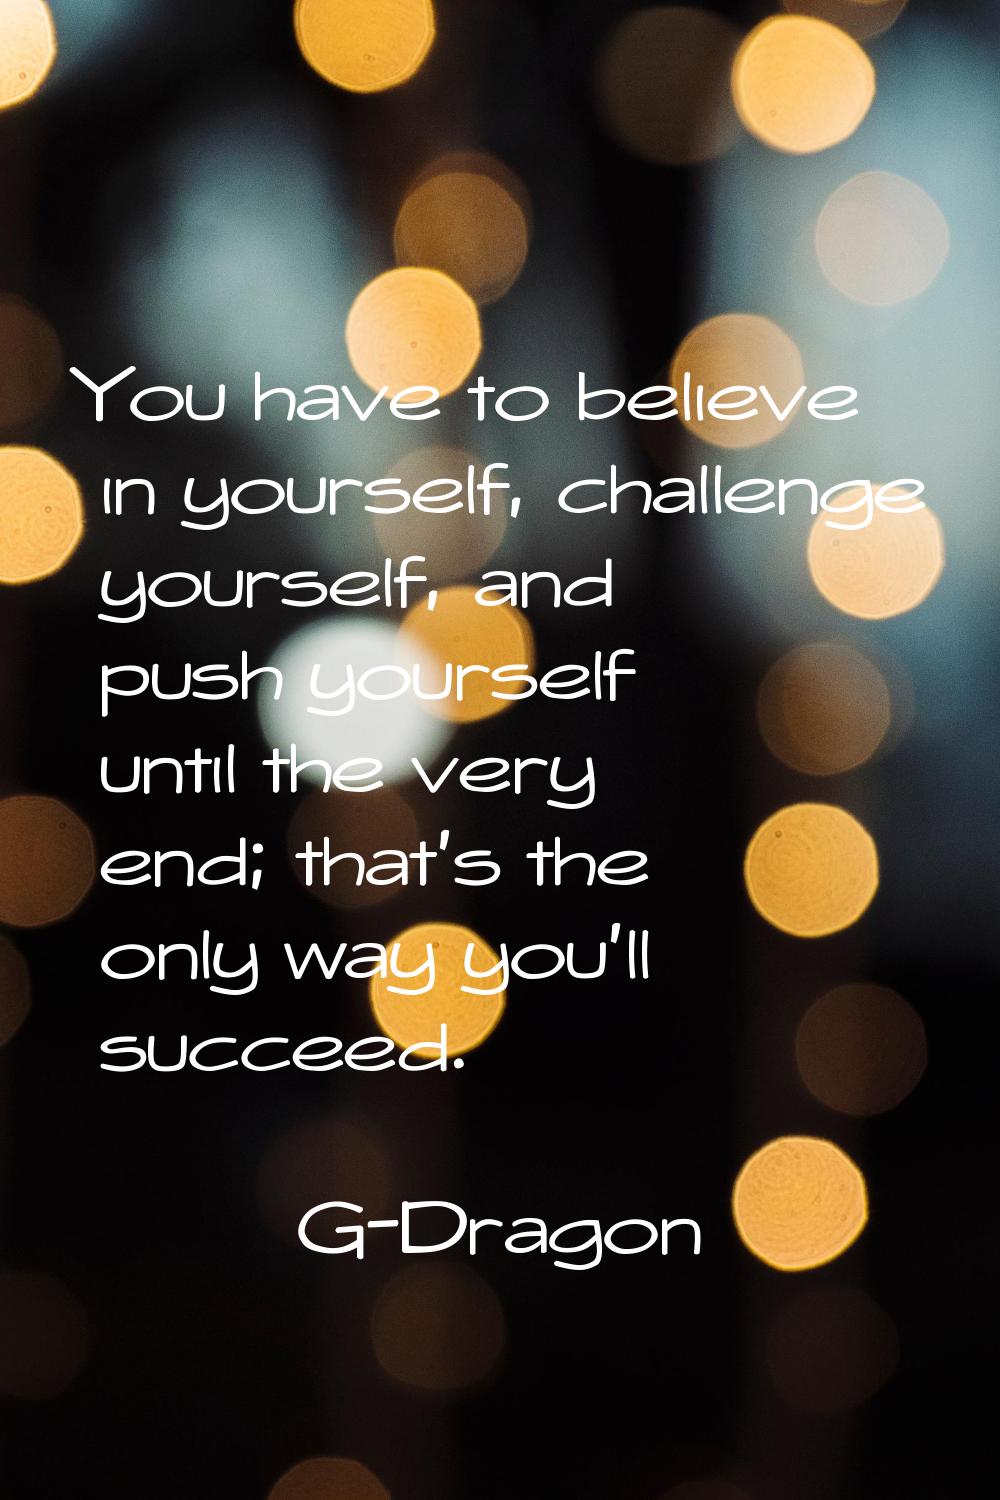 You have to believe in yourself, challenge yourself, and push yourself until the very end; that's t